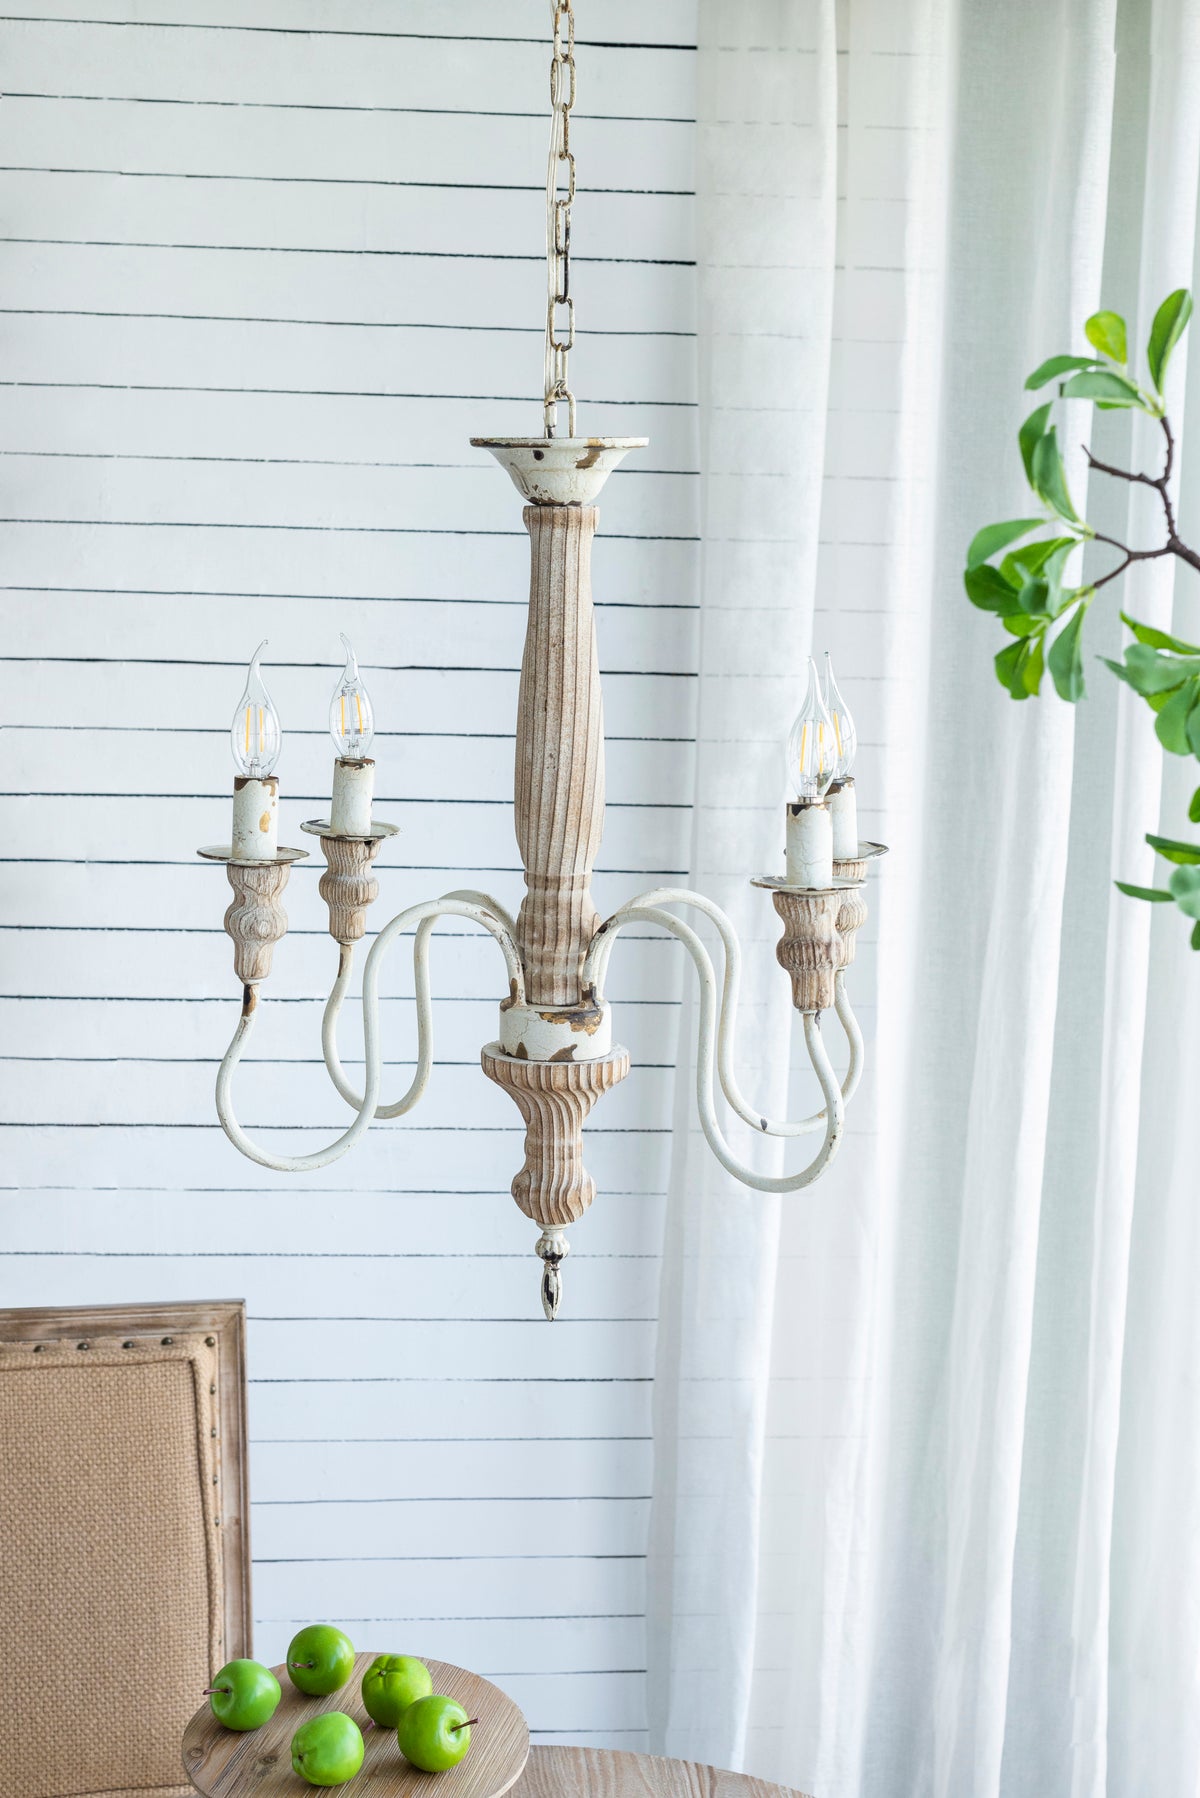 4-Light Rustic Style Chandelier, Hanging Light Fixture with Adjustable Chain - Cream White